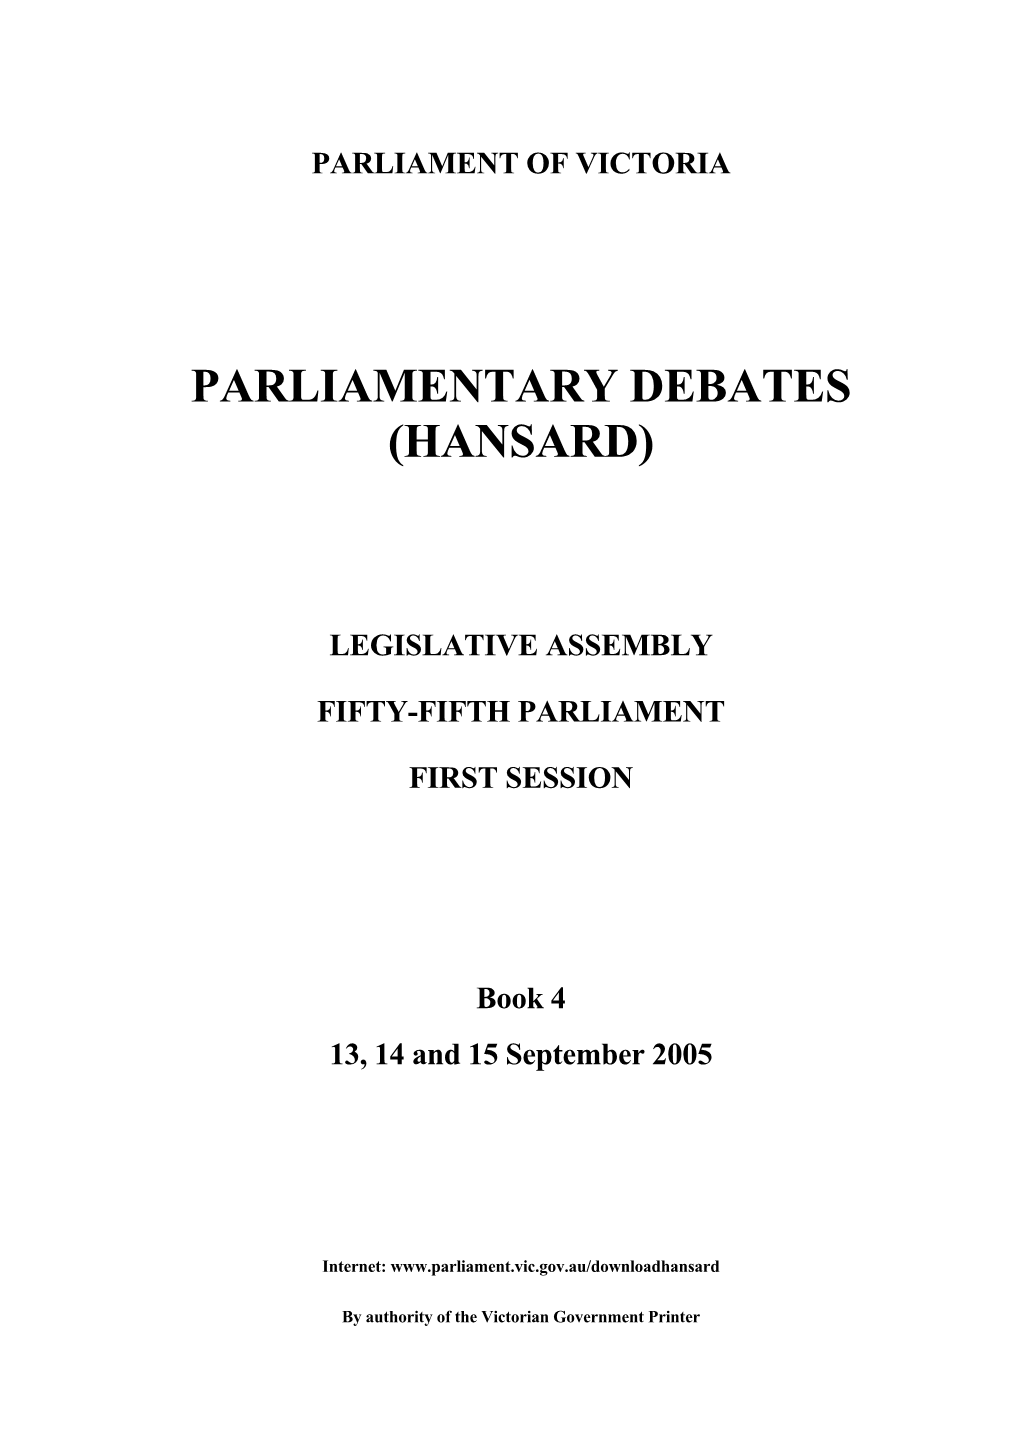 Book 4 13, 14 and 15 September 2005